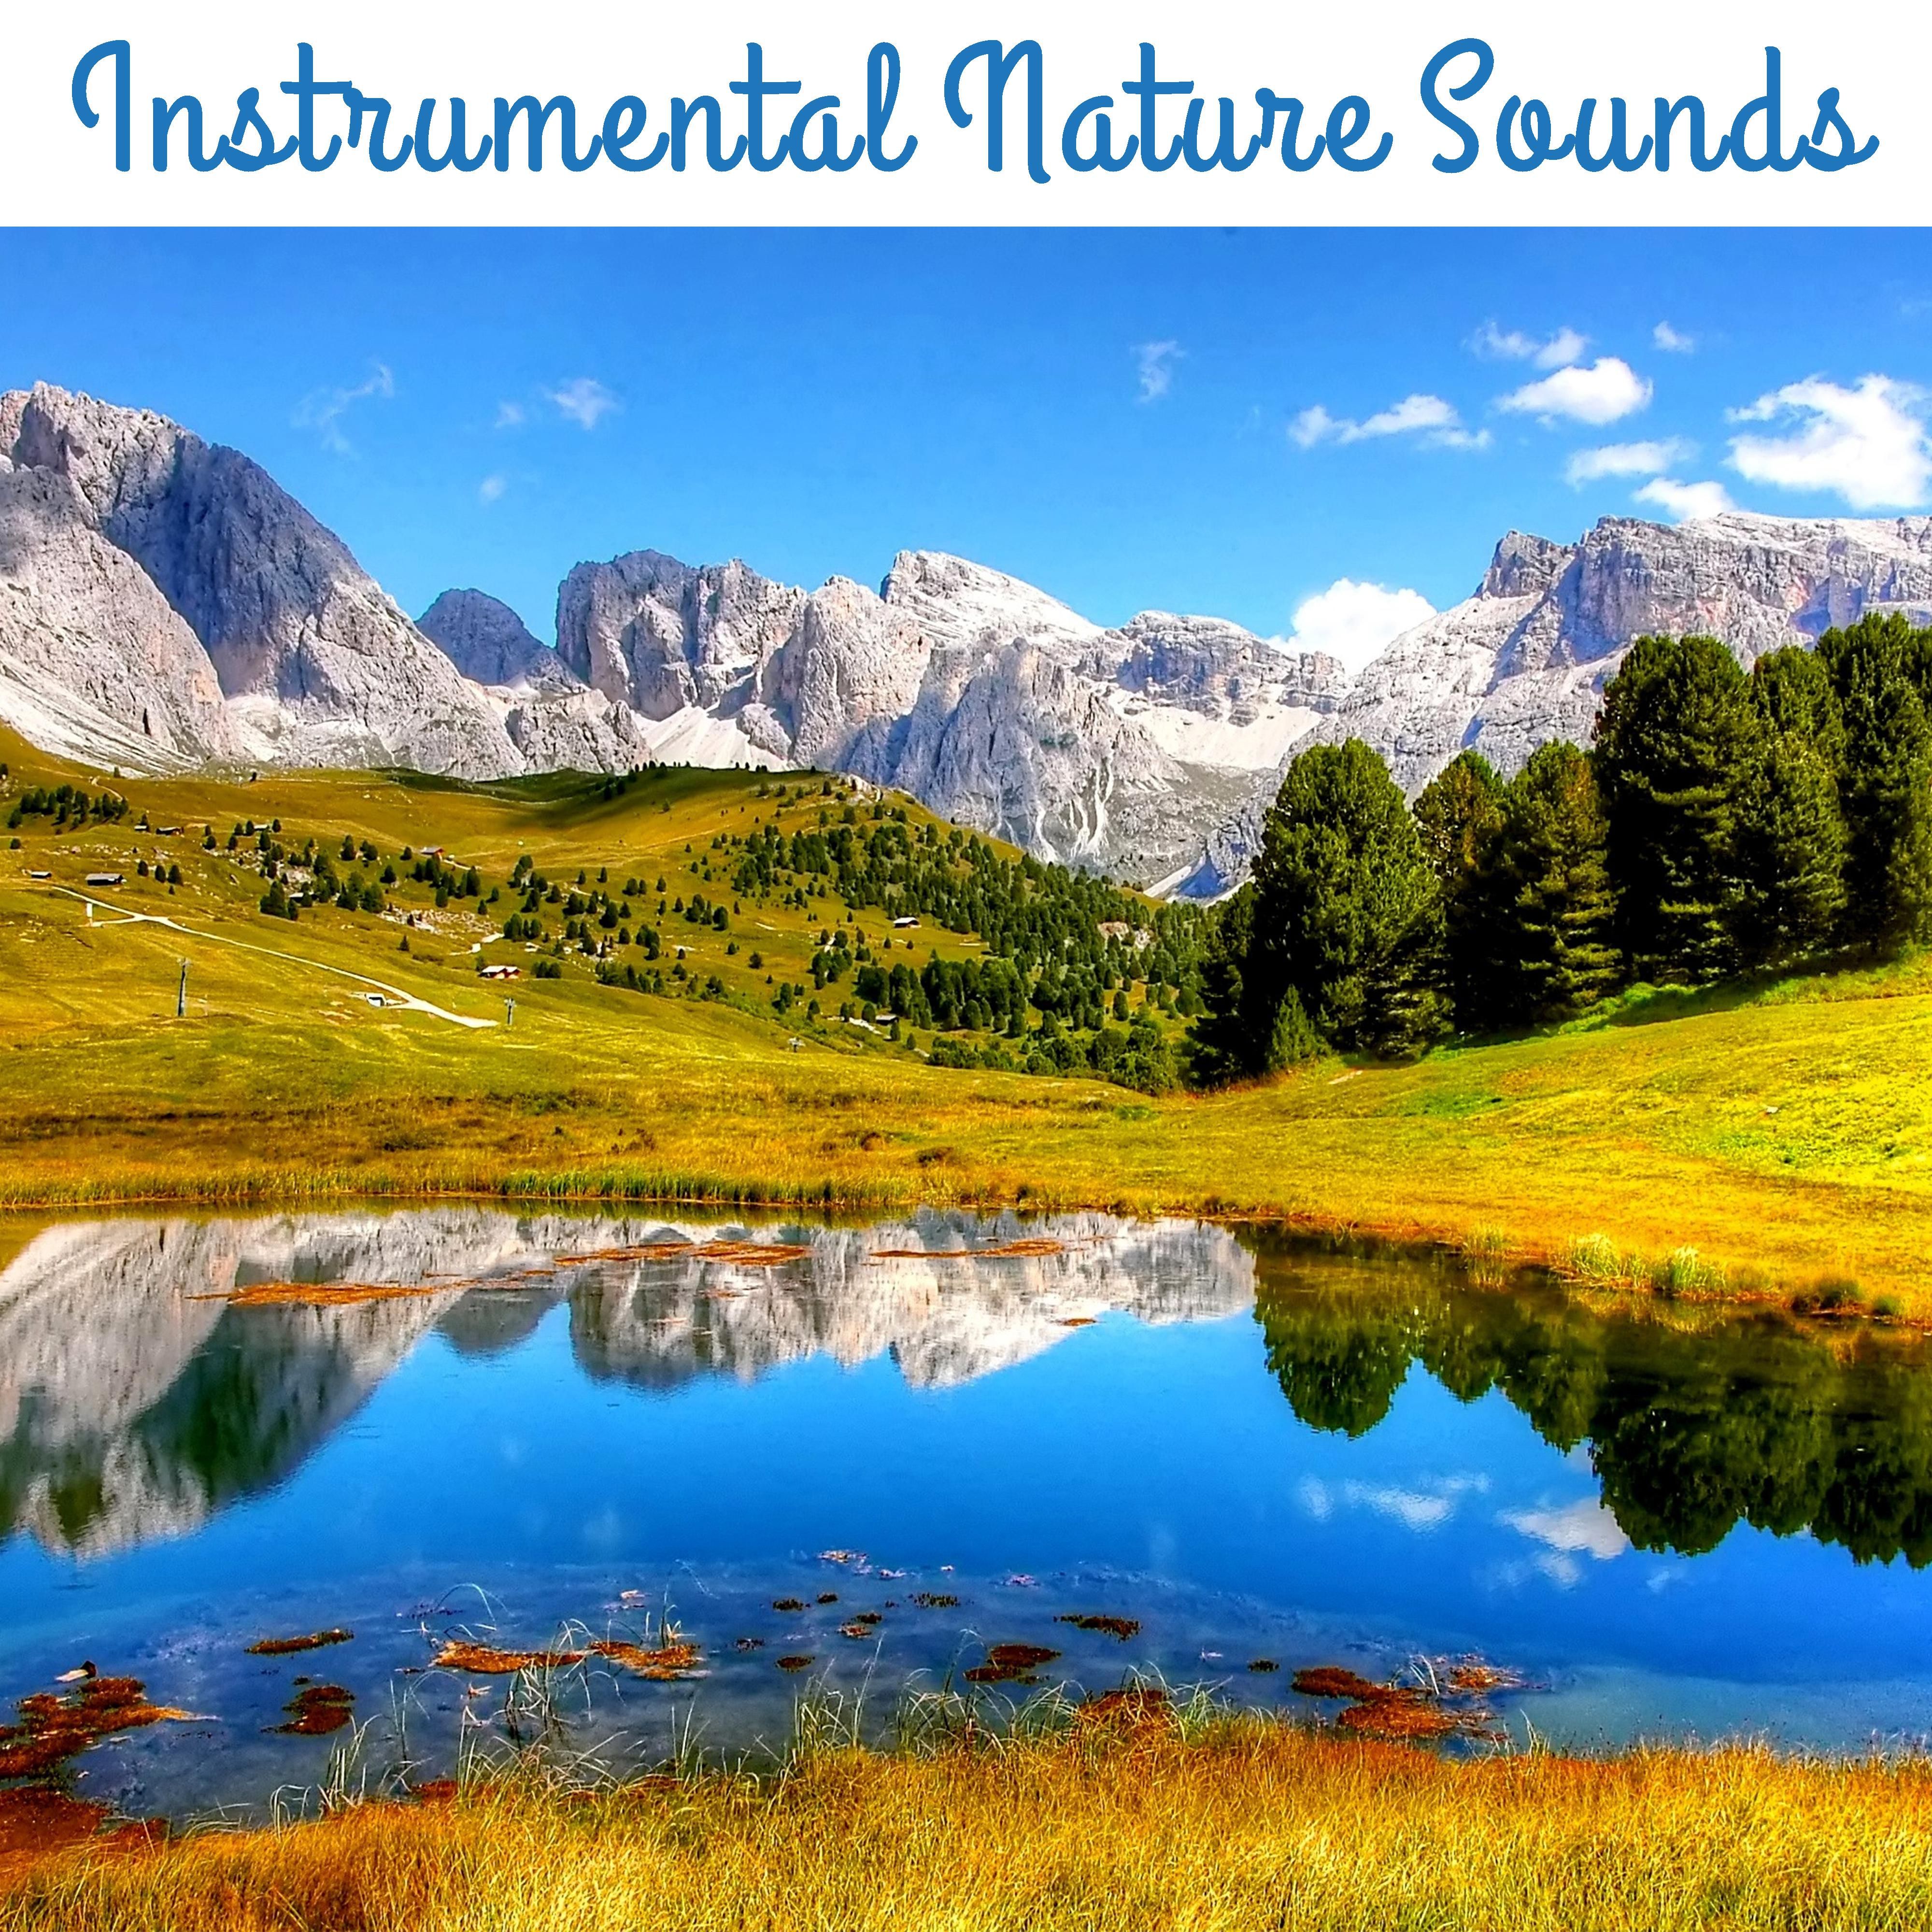 Instrumental Nature Sounds  Nature Healing Touch, Easy Listening, Peaceful Waves, Stress Relief, Inner Calmness